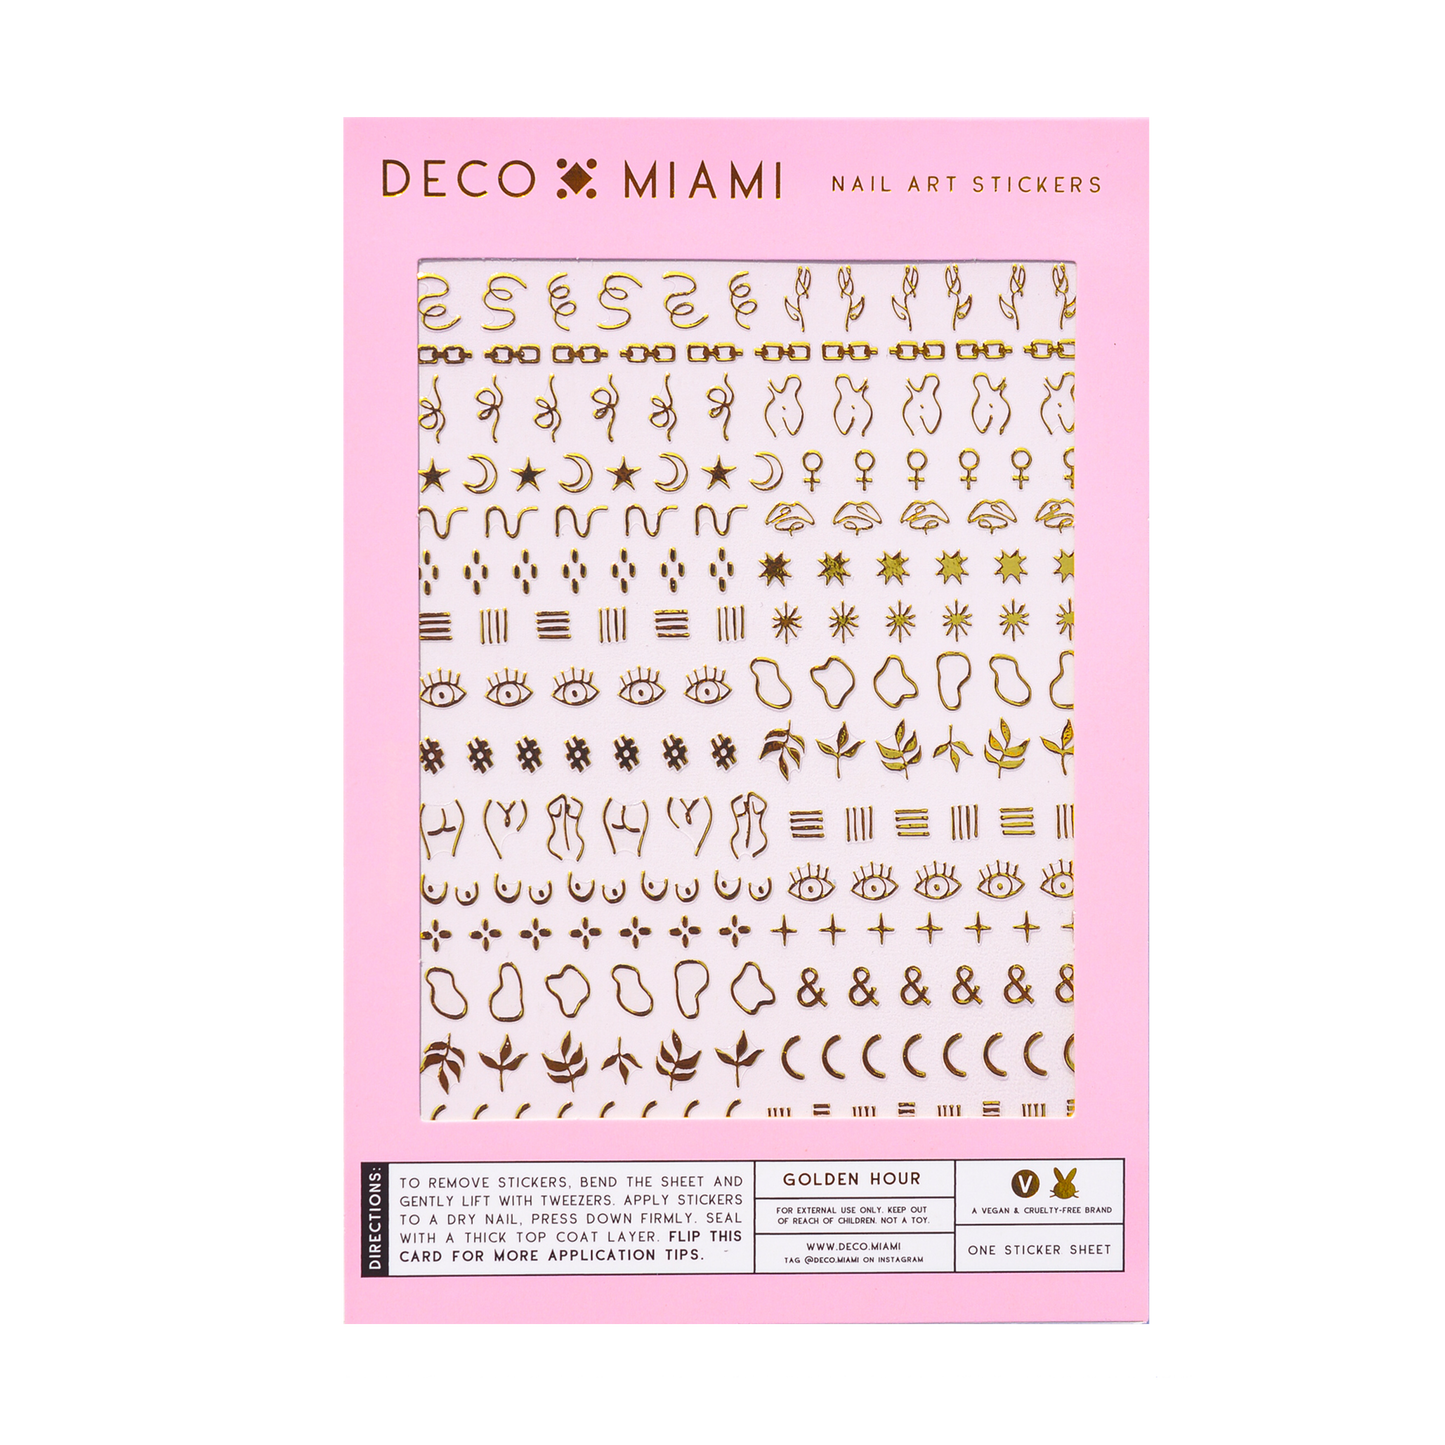 Golden Hour nail art stickers. Featuring: lines,  boobs, butts, feminine, gold, hashtag, female, woman, butt, link, chain, star, moon, goddess, edgy, minimalist, minimalism